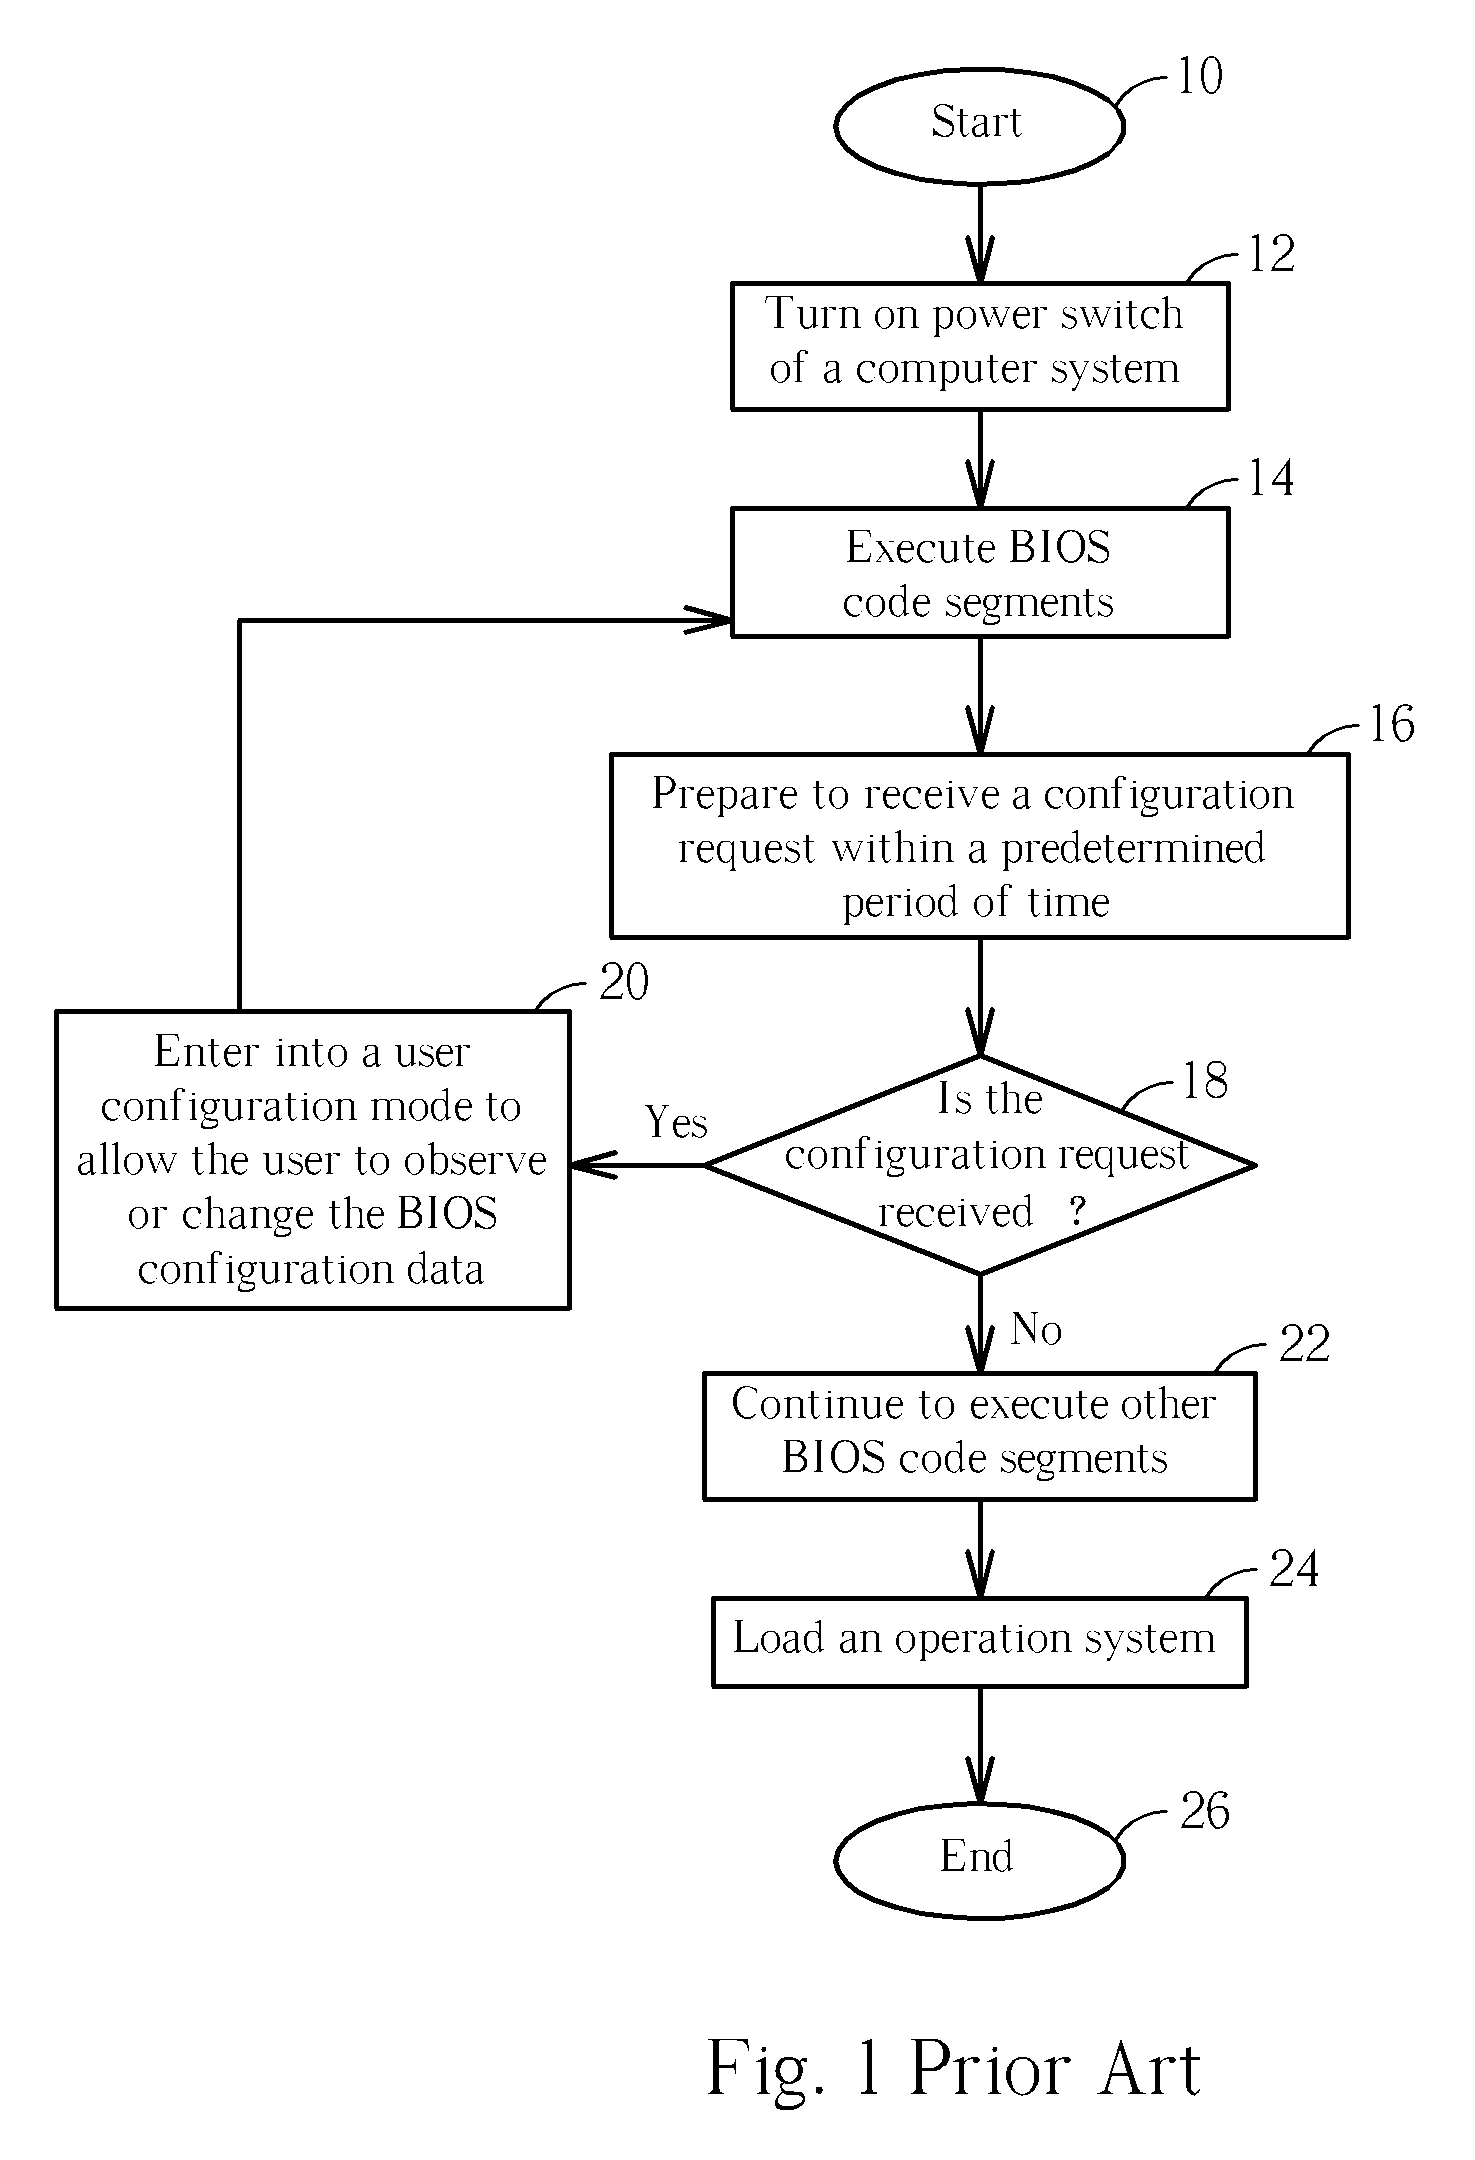 Method for Booting a Computer System